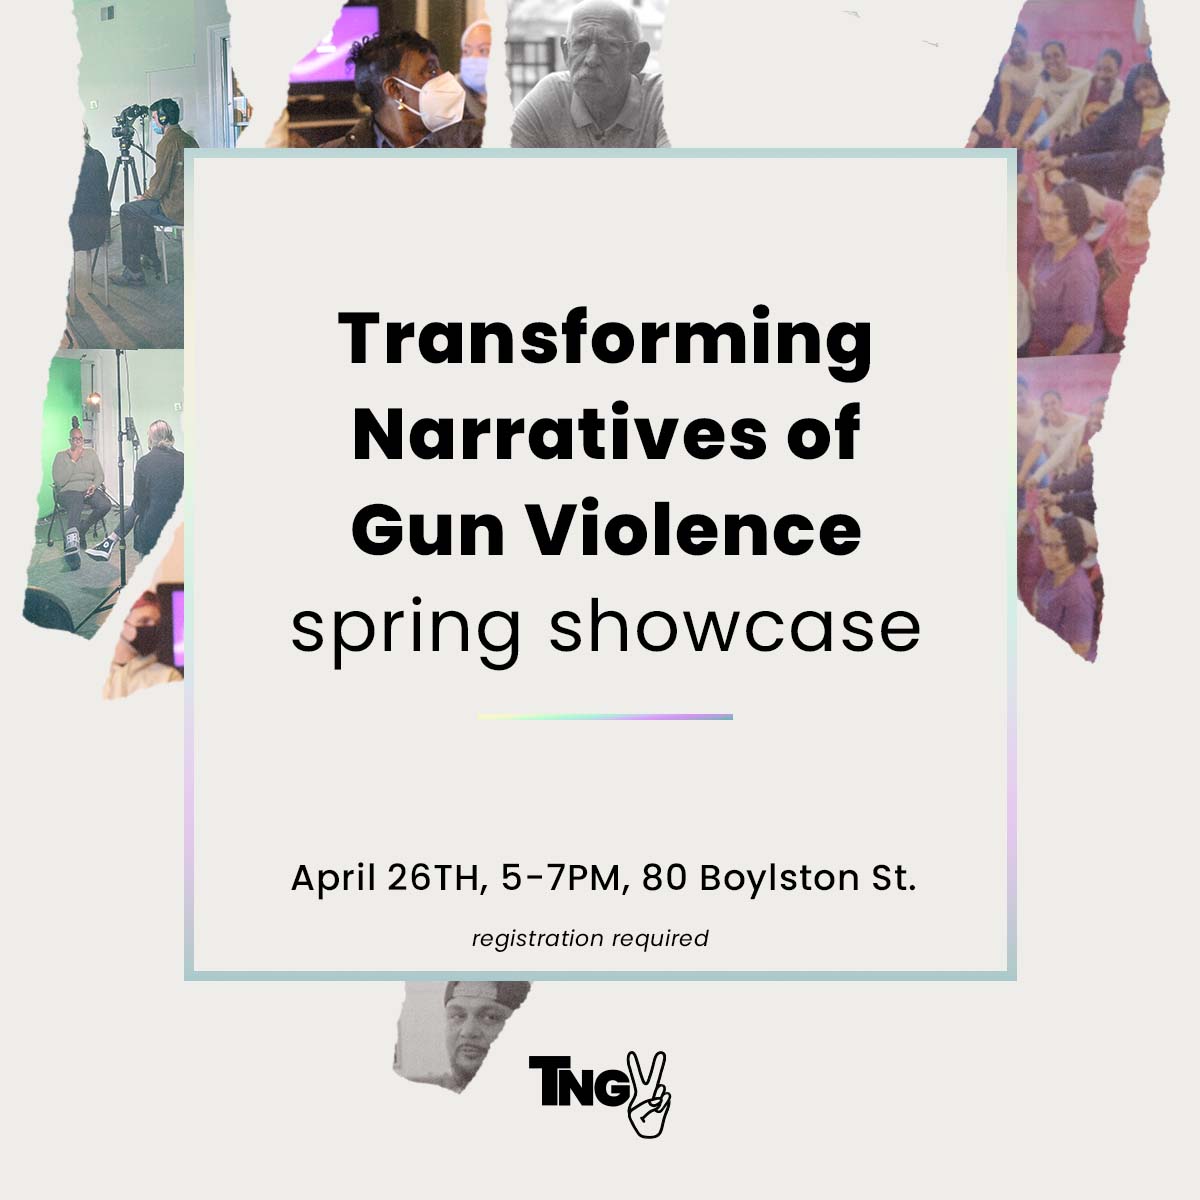 Join us on April 26th for the Transforming Narratives of Gun Violence Spring Showcase. We will be showcasing our work for the past semester and celebrating the launch of the website. FREE food and drinks will be provided! Register: eventbrite.com/e/tngv-spring-… @LDBpeaceInst @MGH_GVPC